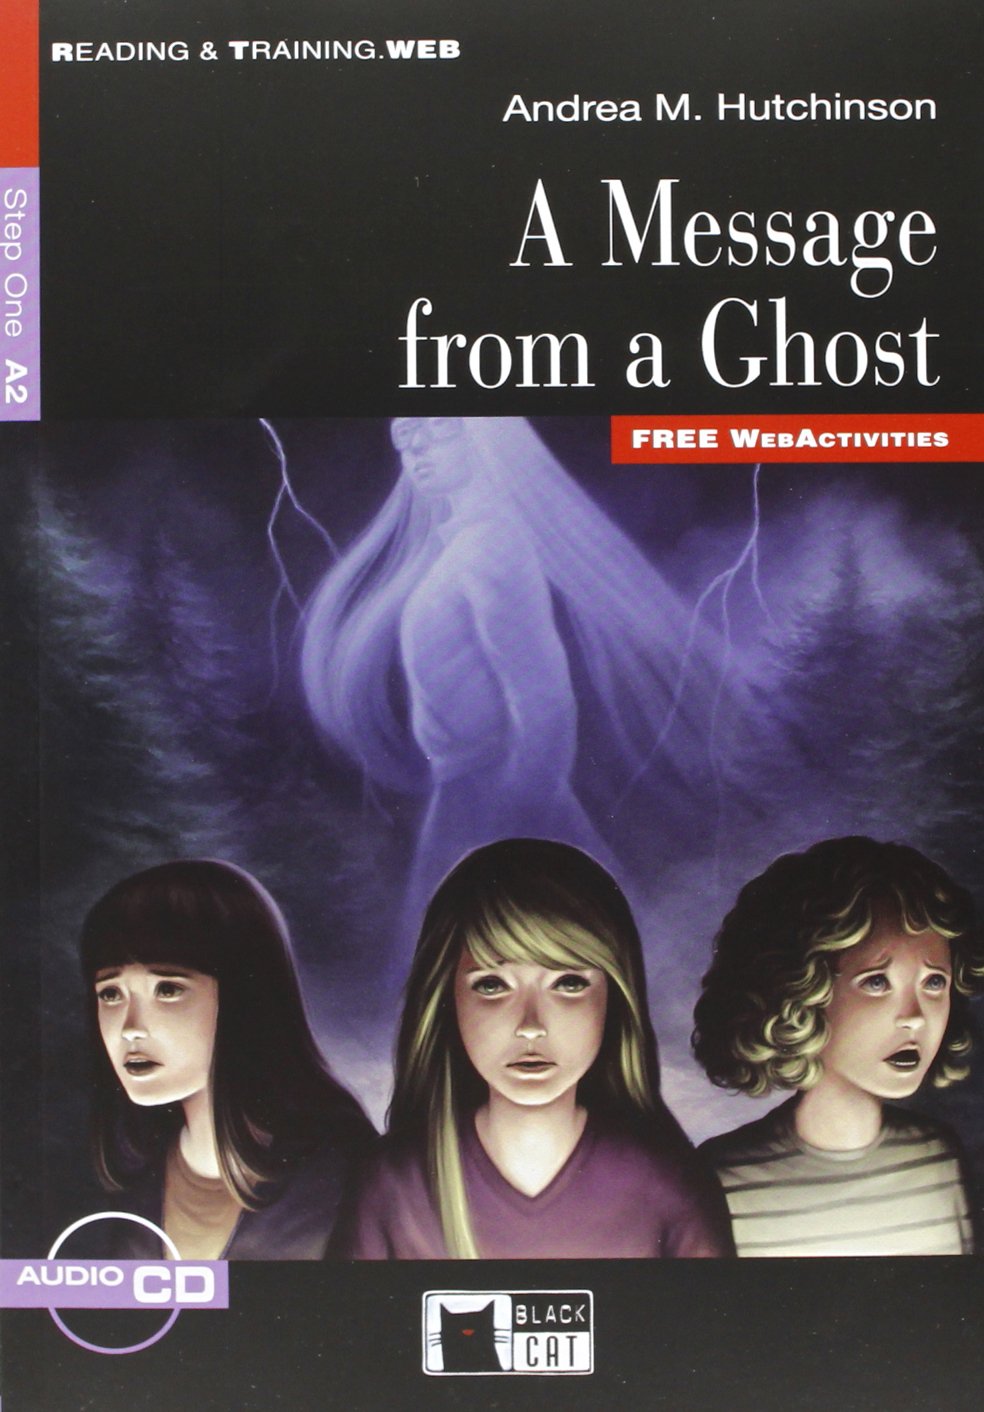 A Message from a Ghost (Step 1)